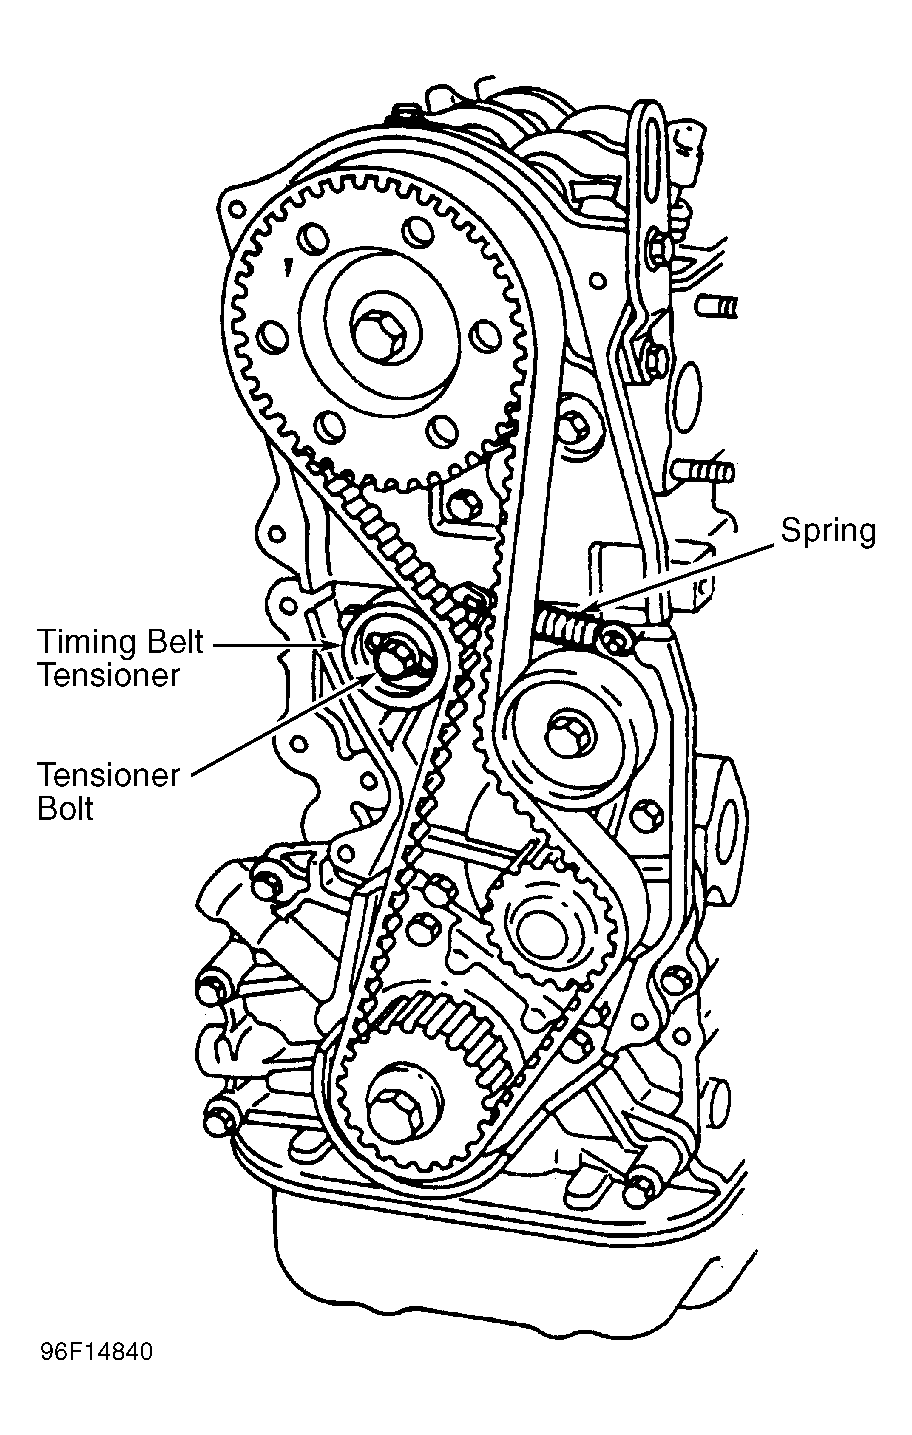 1997 Ford Probe Serpentine Belt Routing and Timing Belt Diagrams